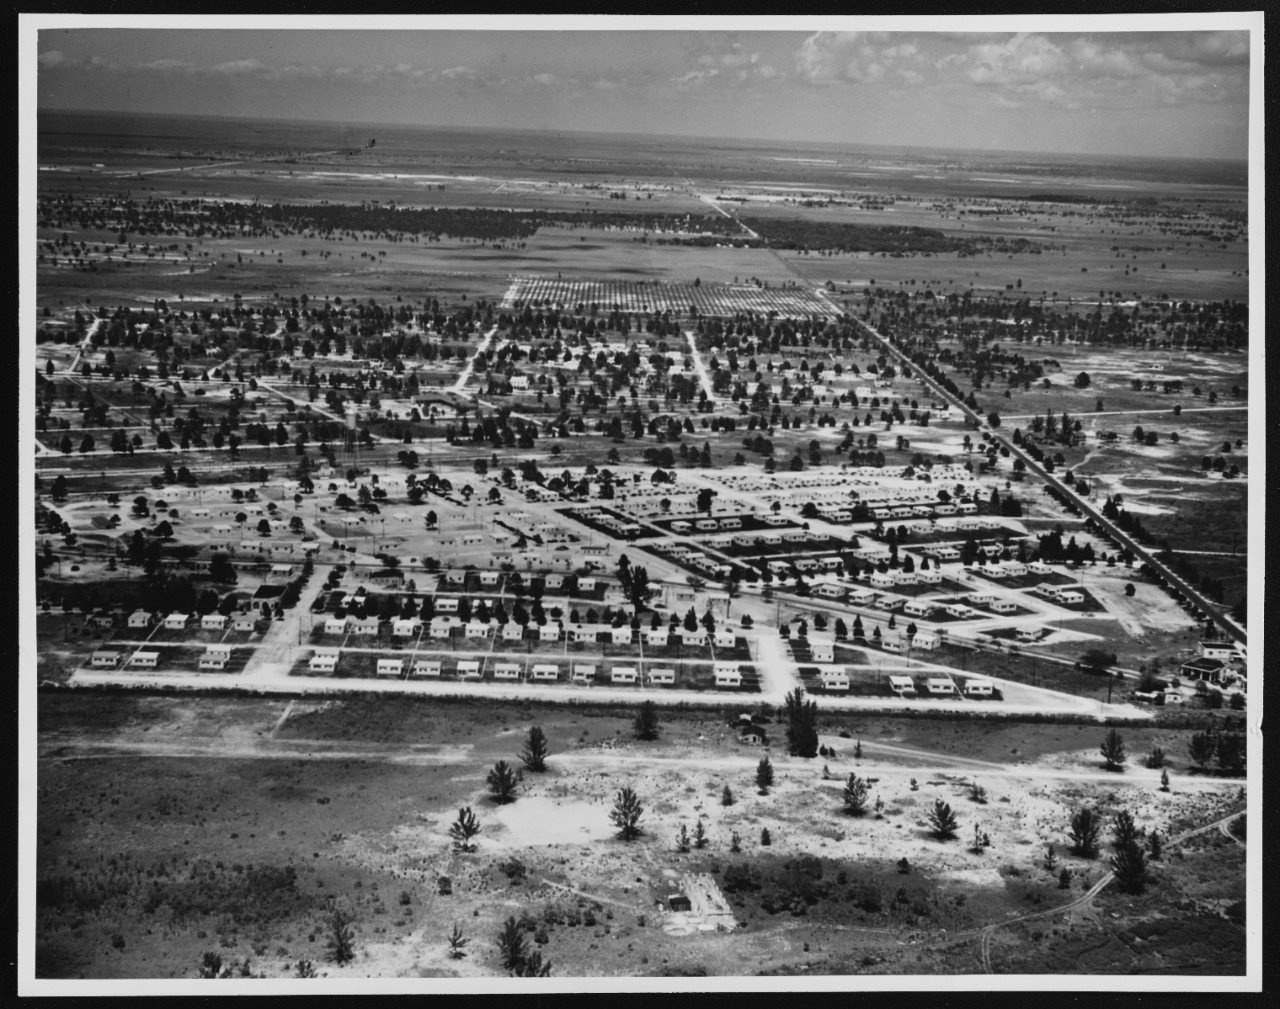 Aerial view of Opa Locka Navy [defenses] Housing Project